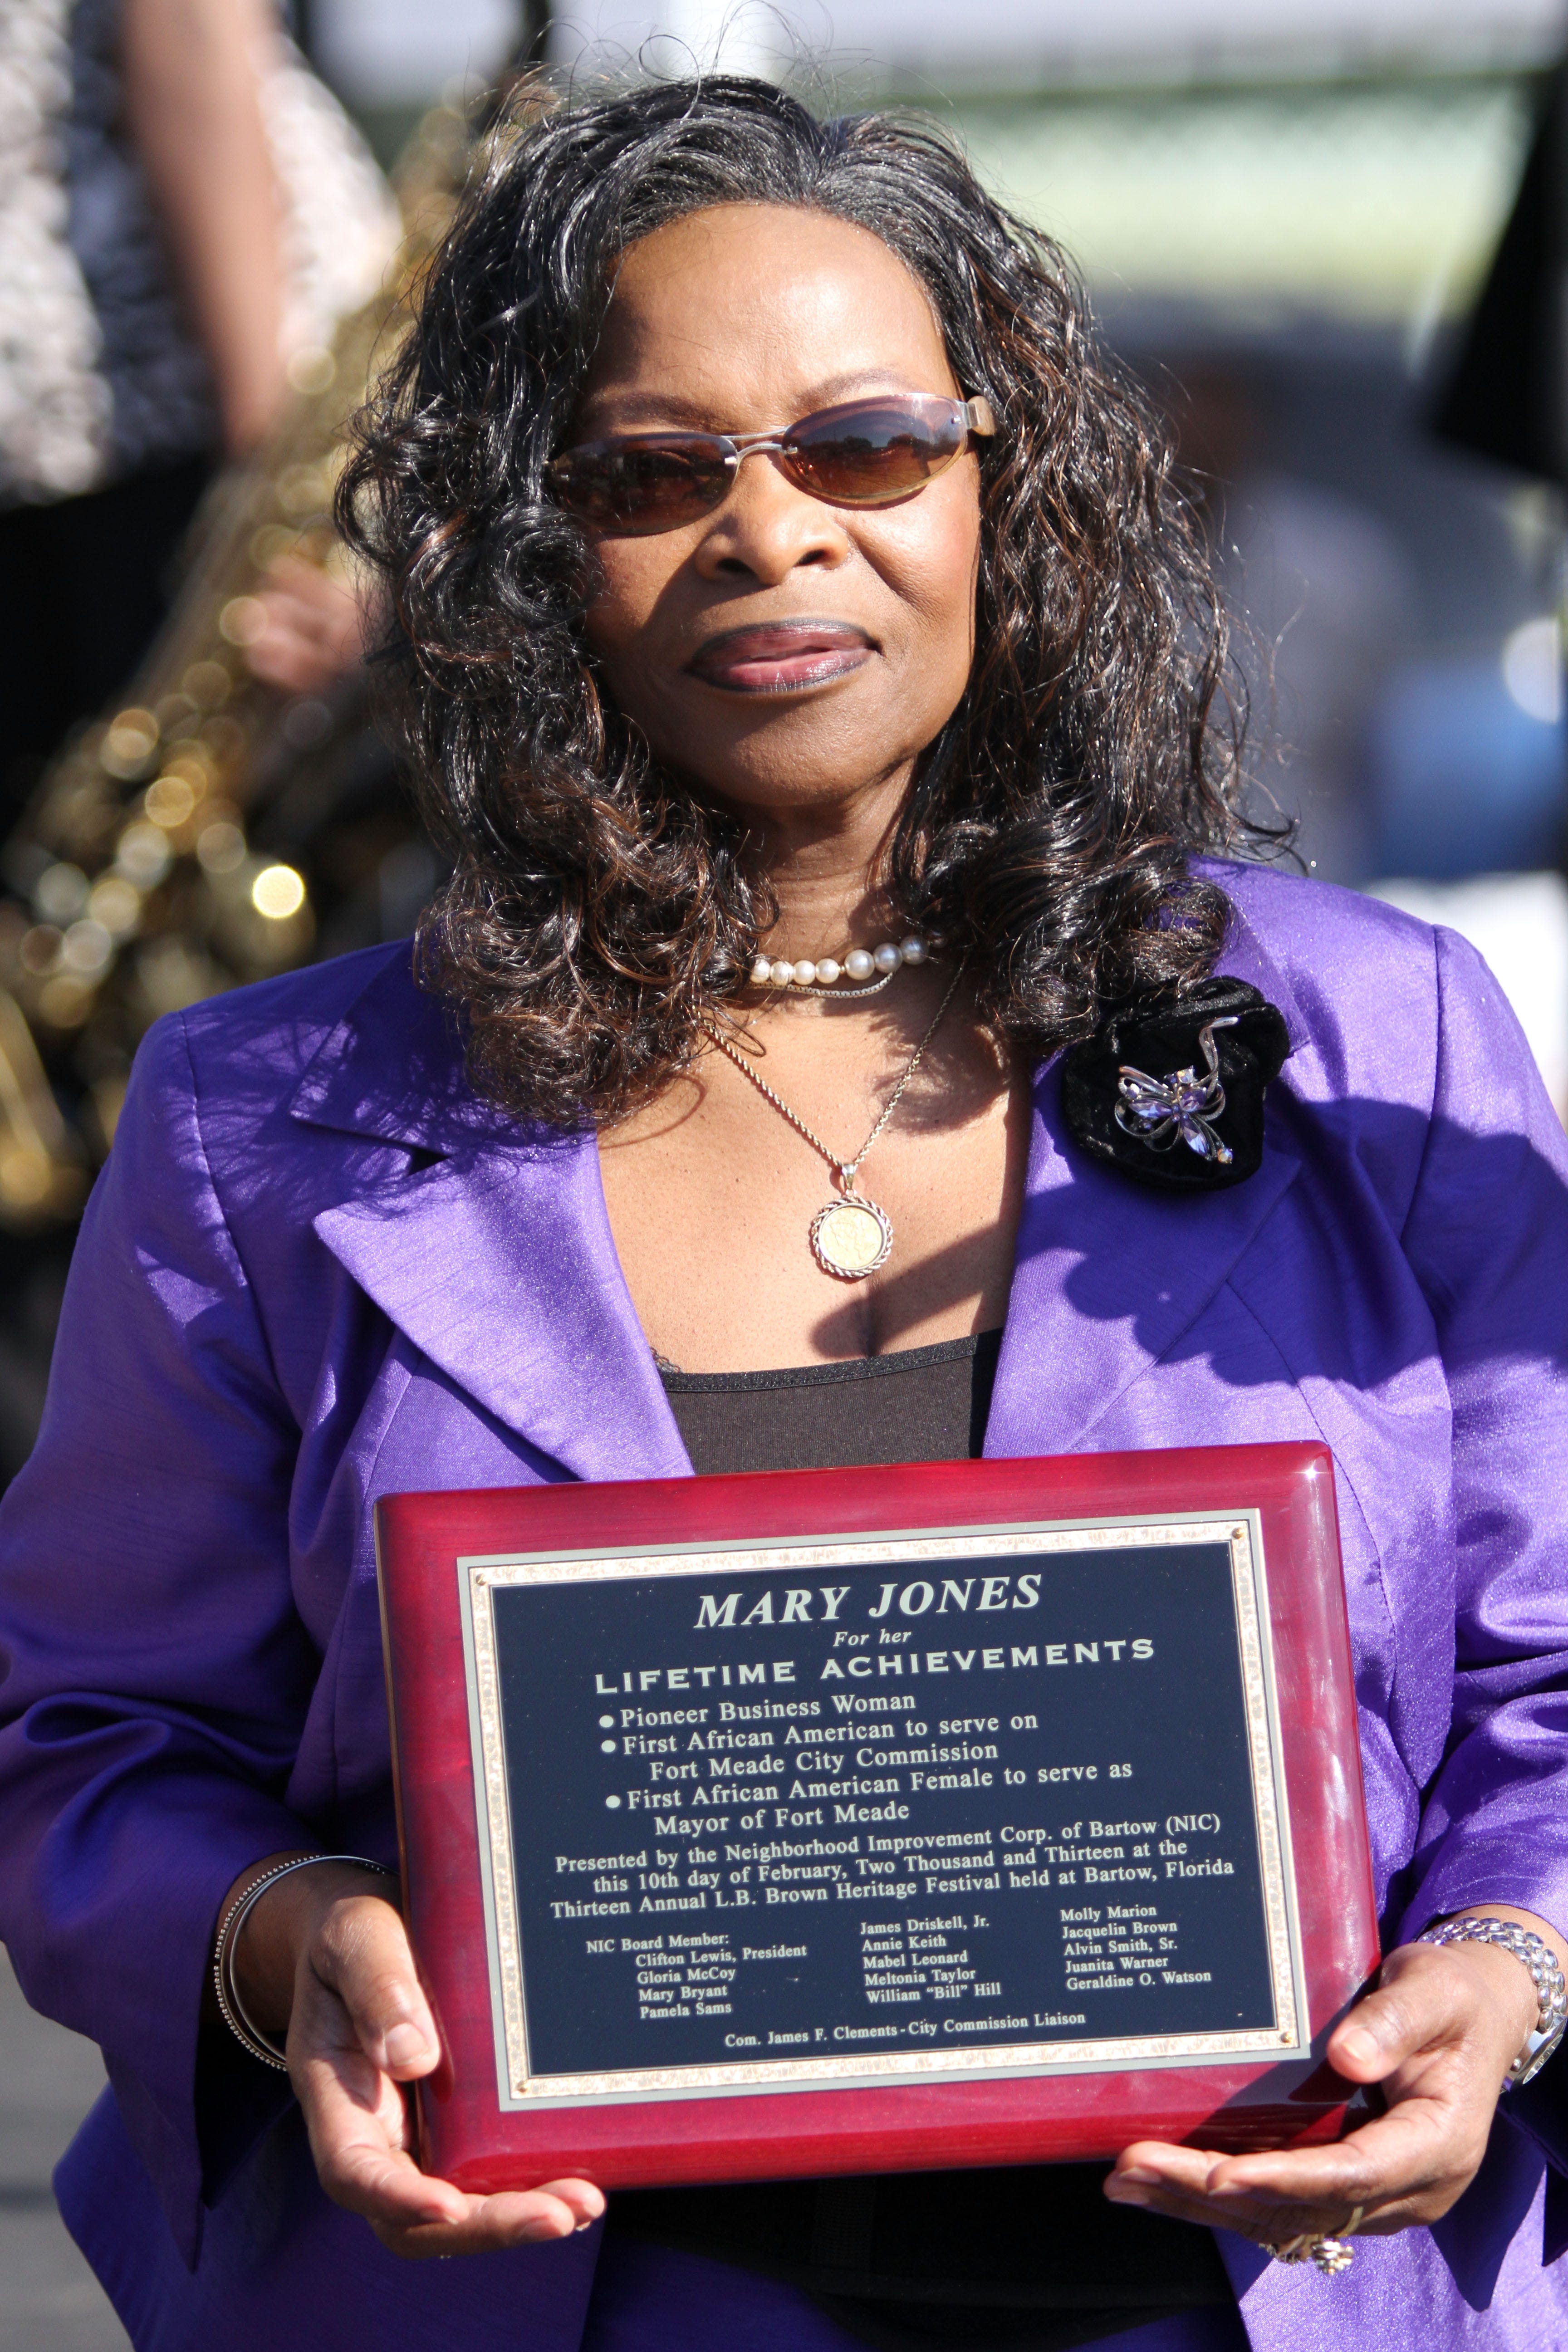 Mary Jones, who unsuccessfully ran for a county commission seat in 1990 and 1994, was presented a Lifetime Achievements award during the 13th Annual L.B. Brown Festival in Bartow on Feb. 9, 2013.